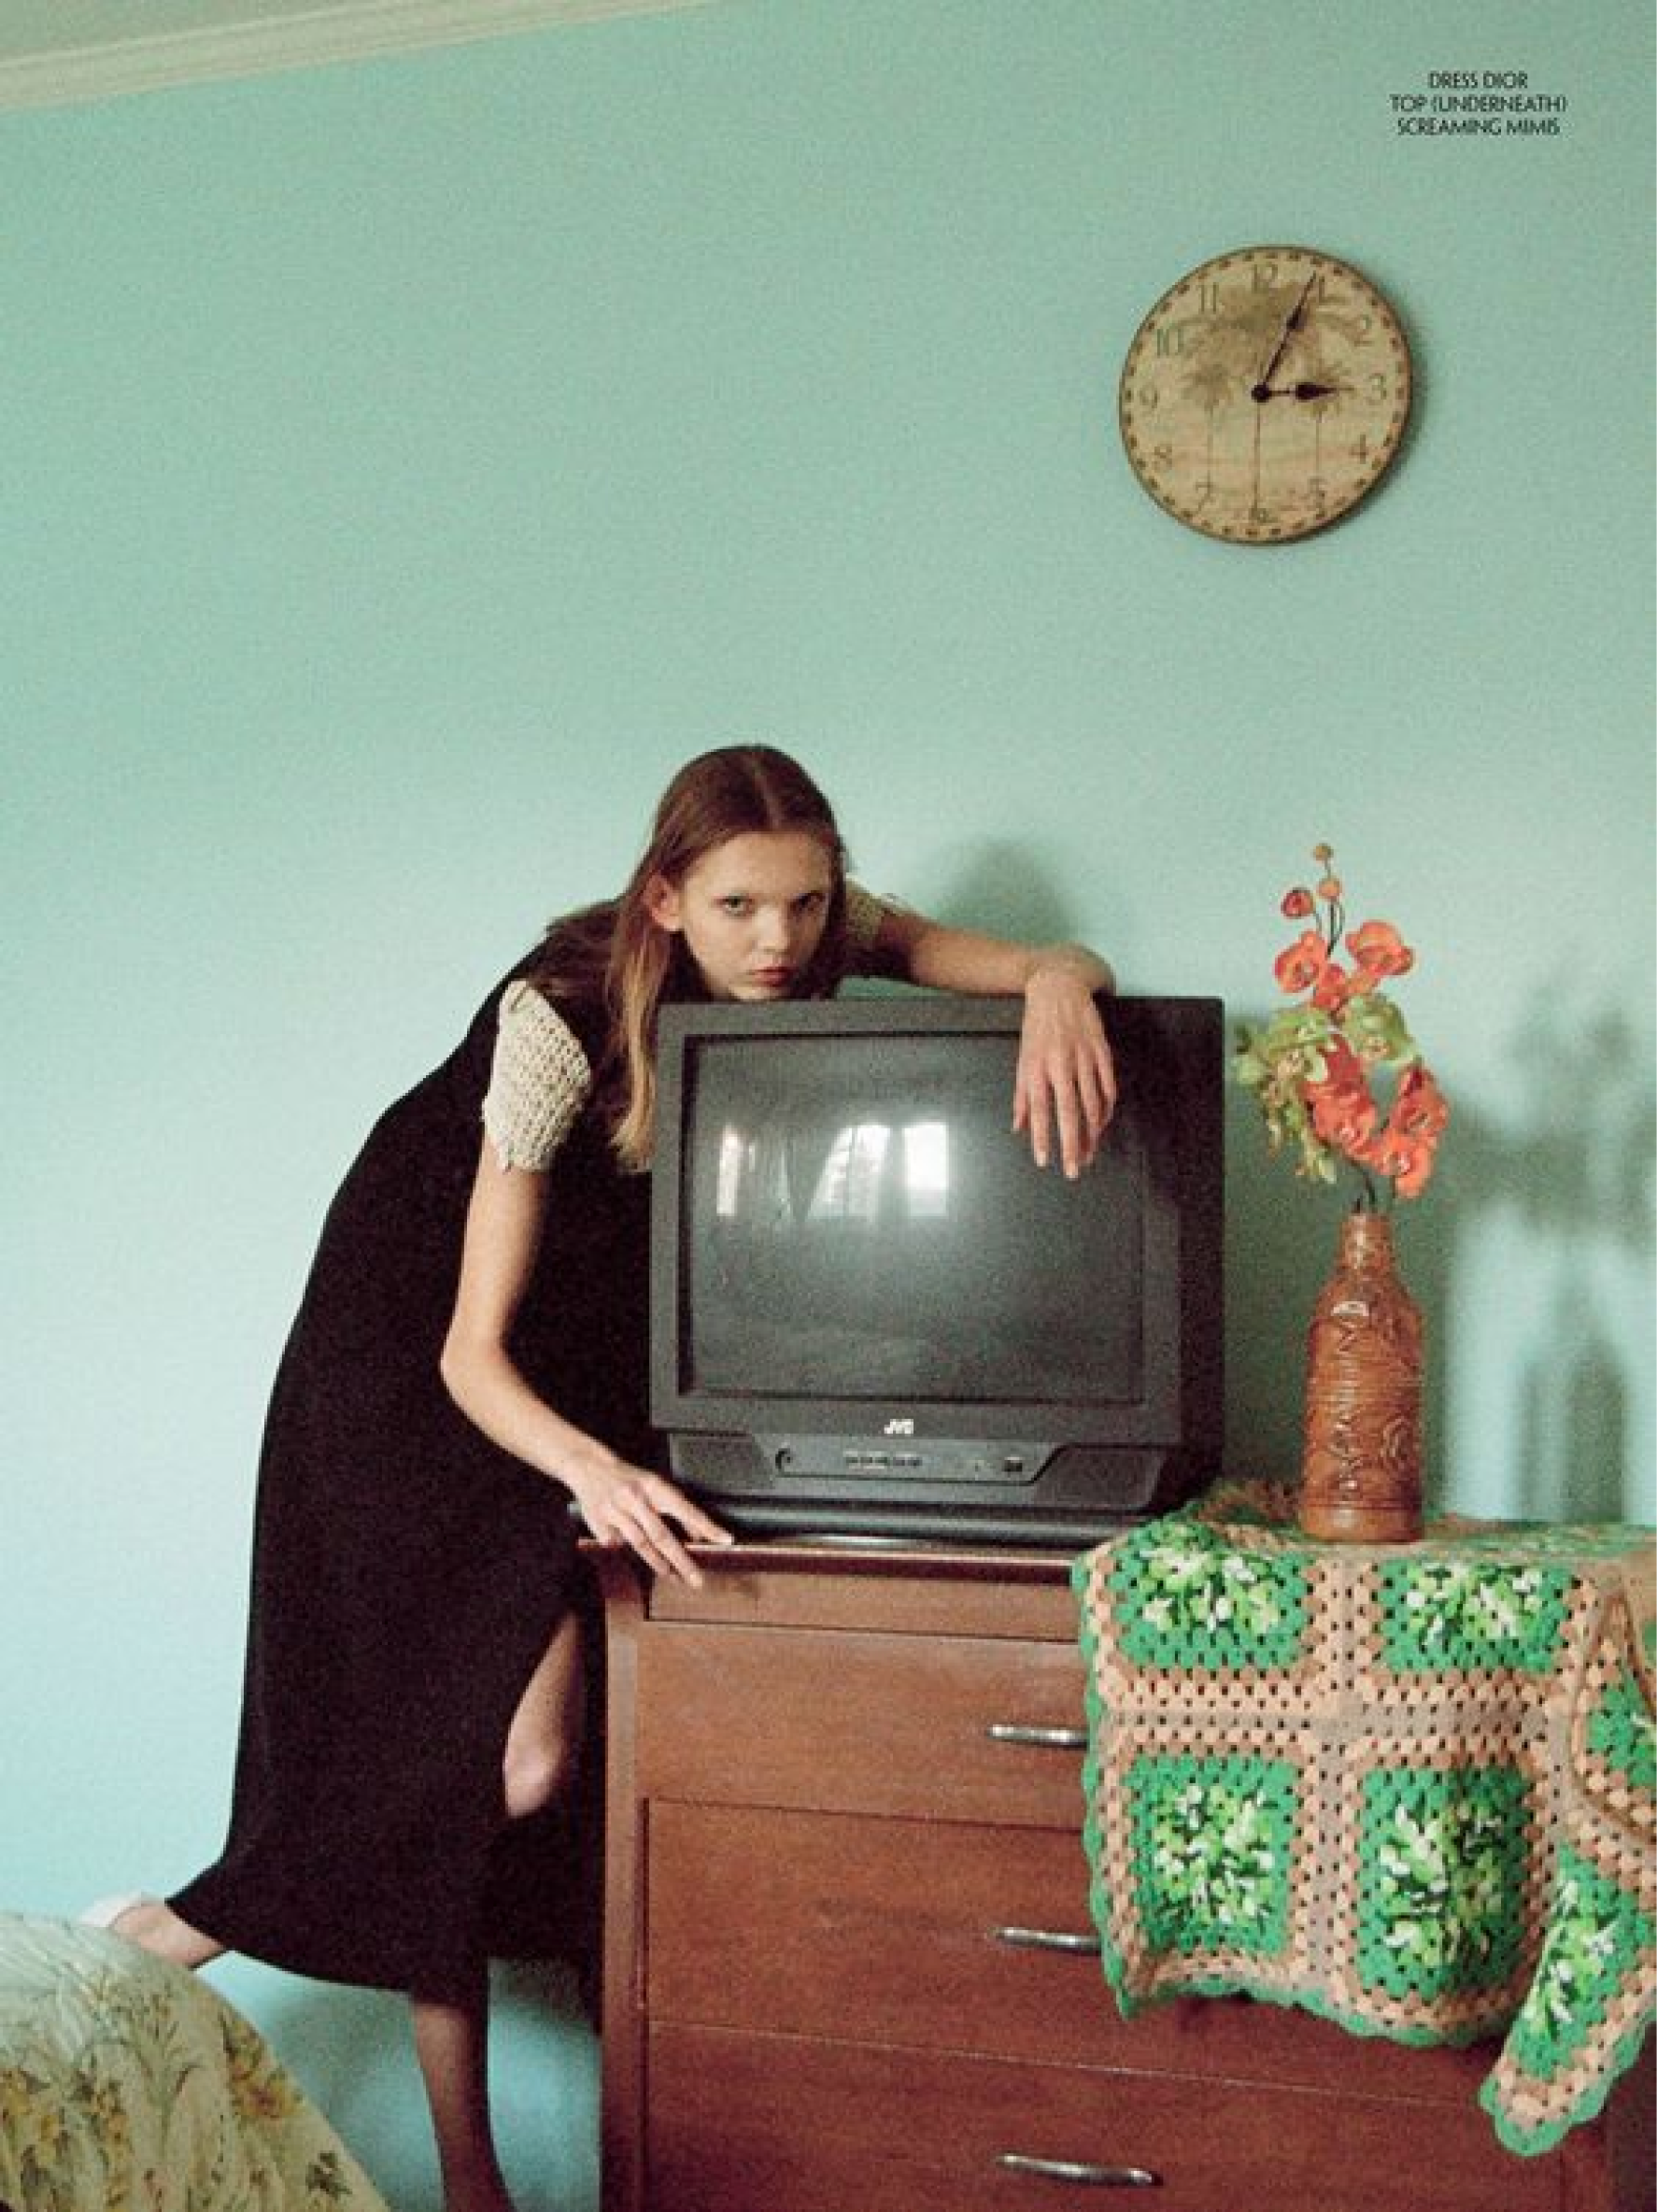 A female model is lying on a television in a green living room.